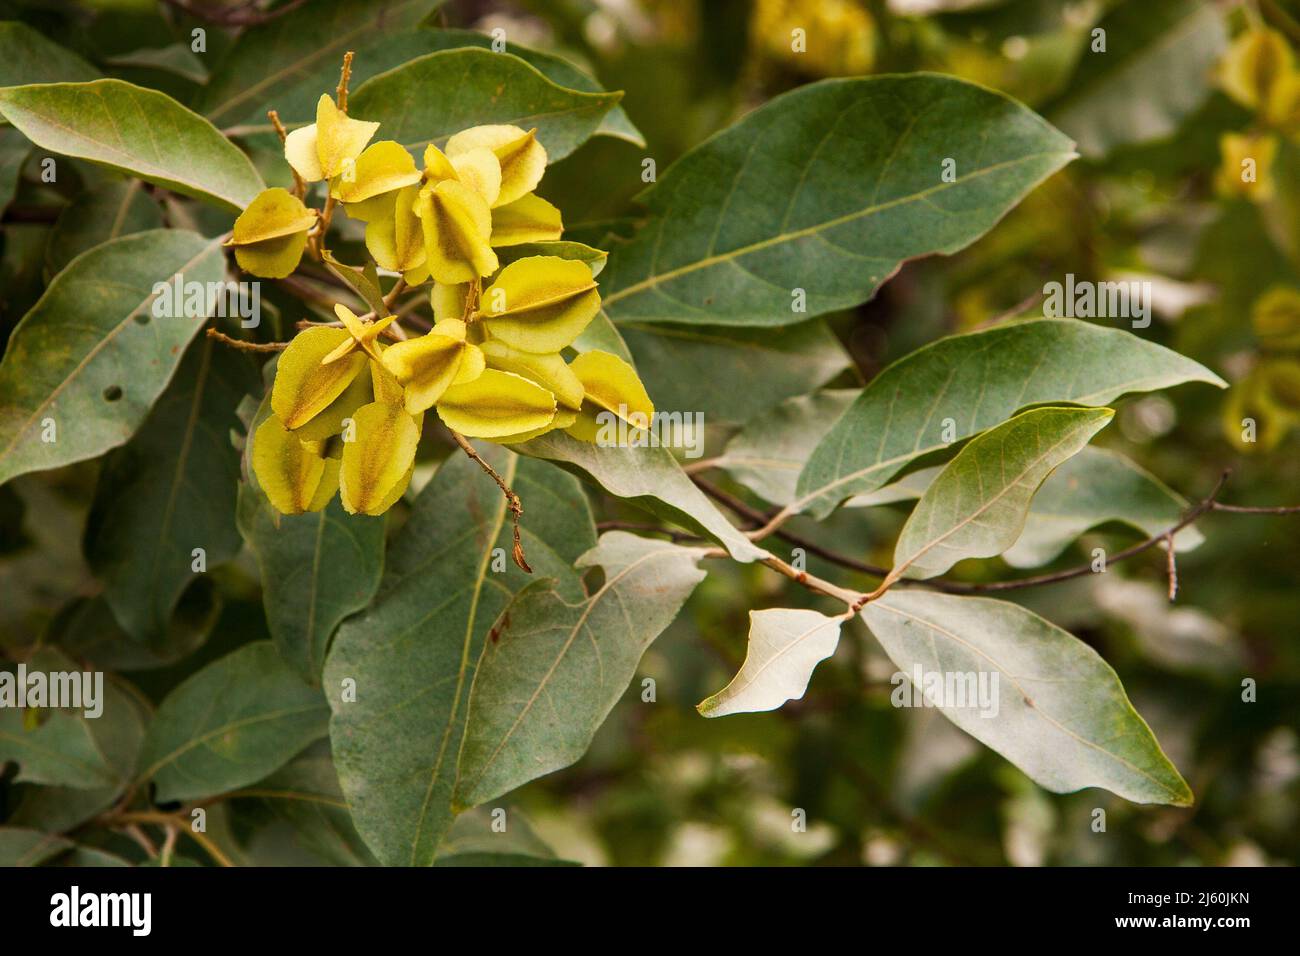 branch of mufumbo (or mofumbo) foot with leaves and flowers Stock Photo